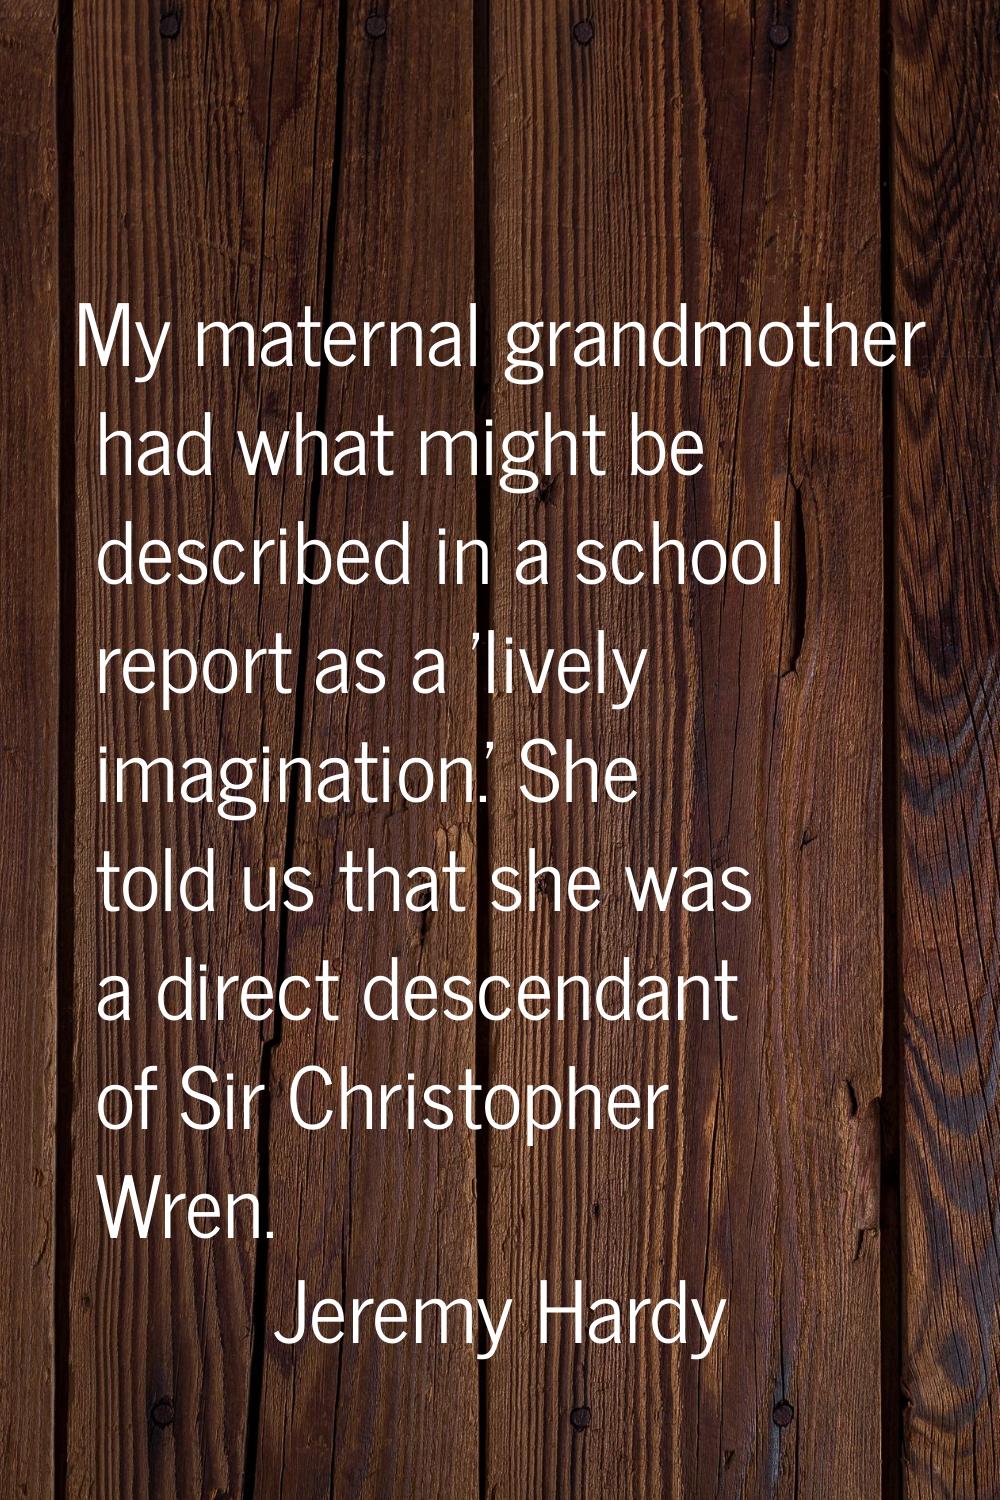 My maternal grandmother had what might be described in a school report as a 'lively imagination.' S